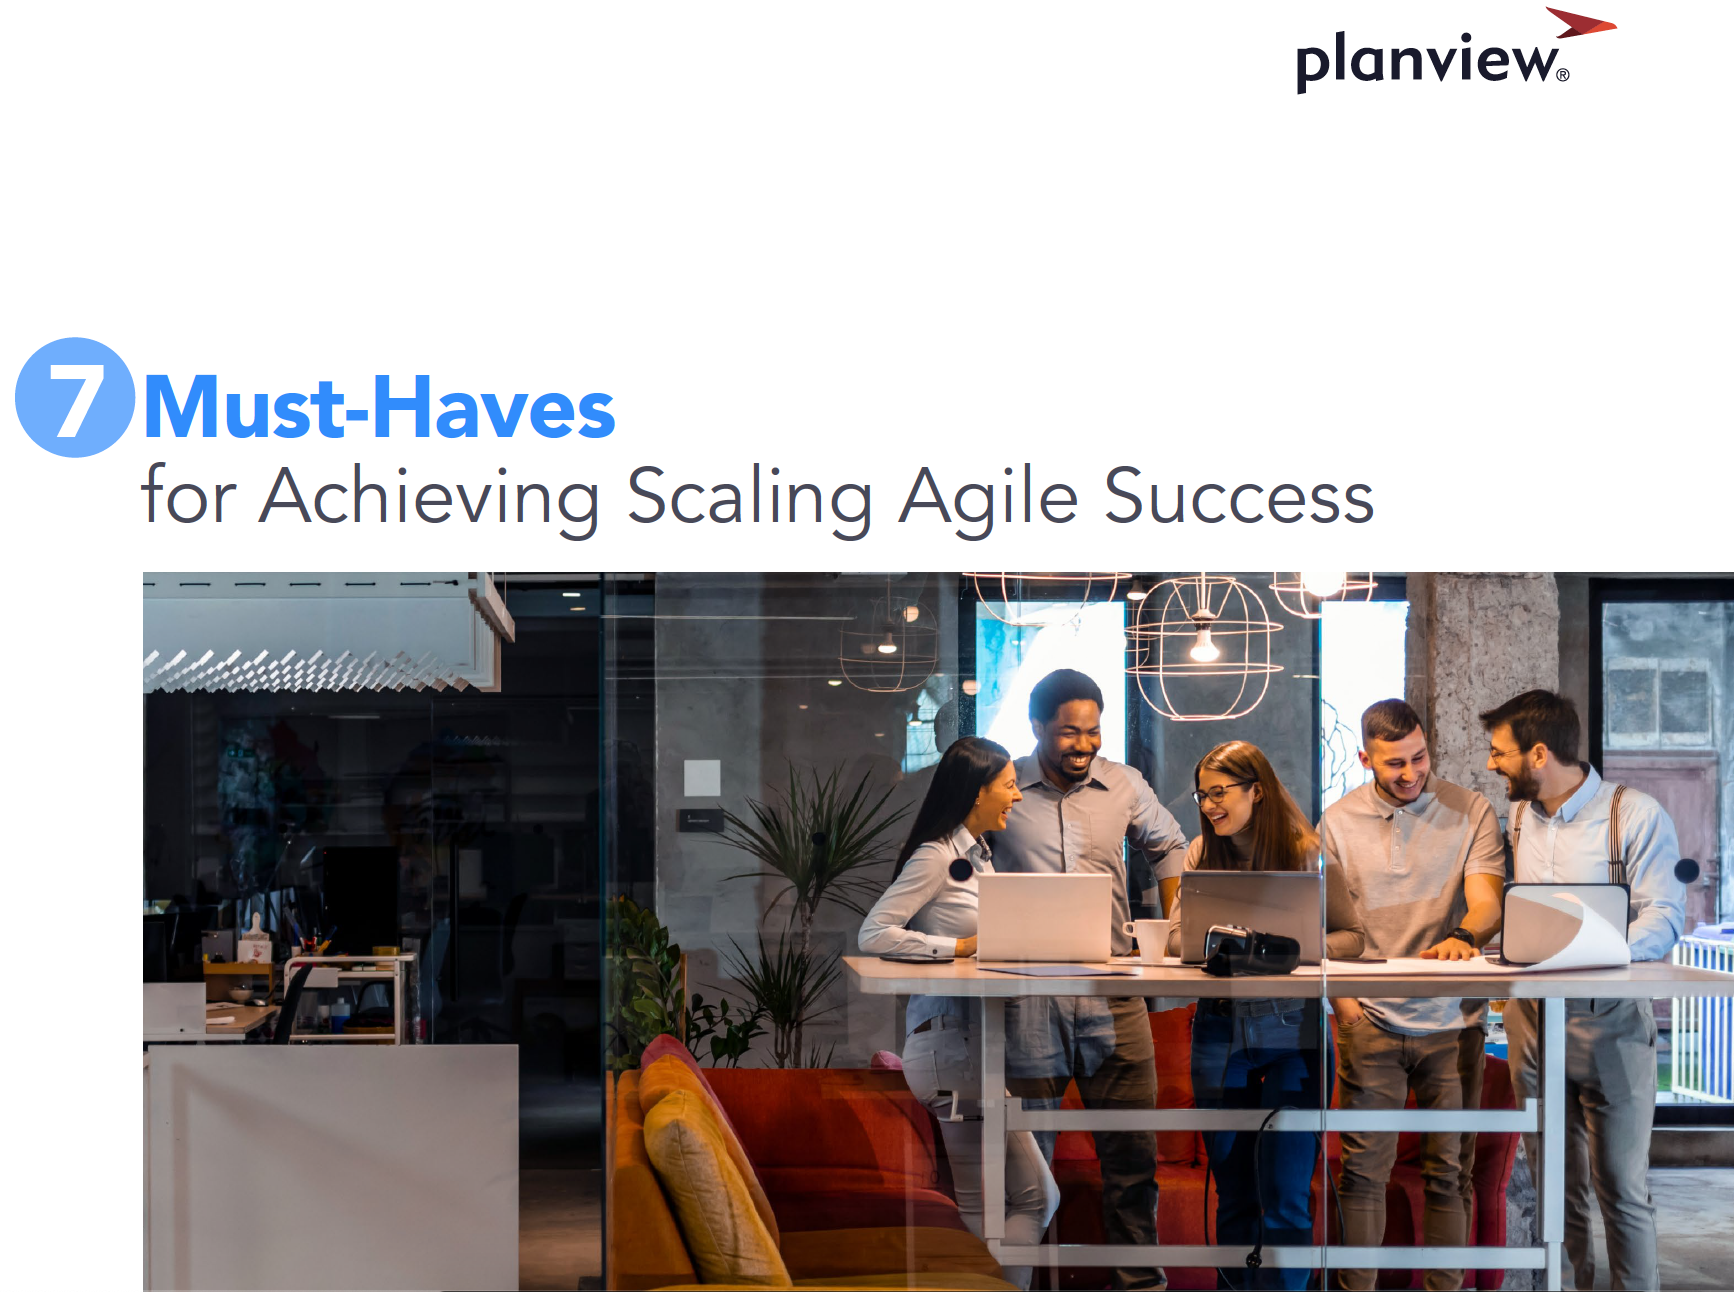 The 7 Must-Haves for Achieving Scaling Agile Success 